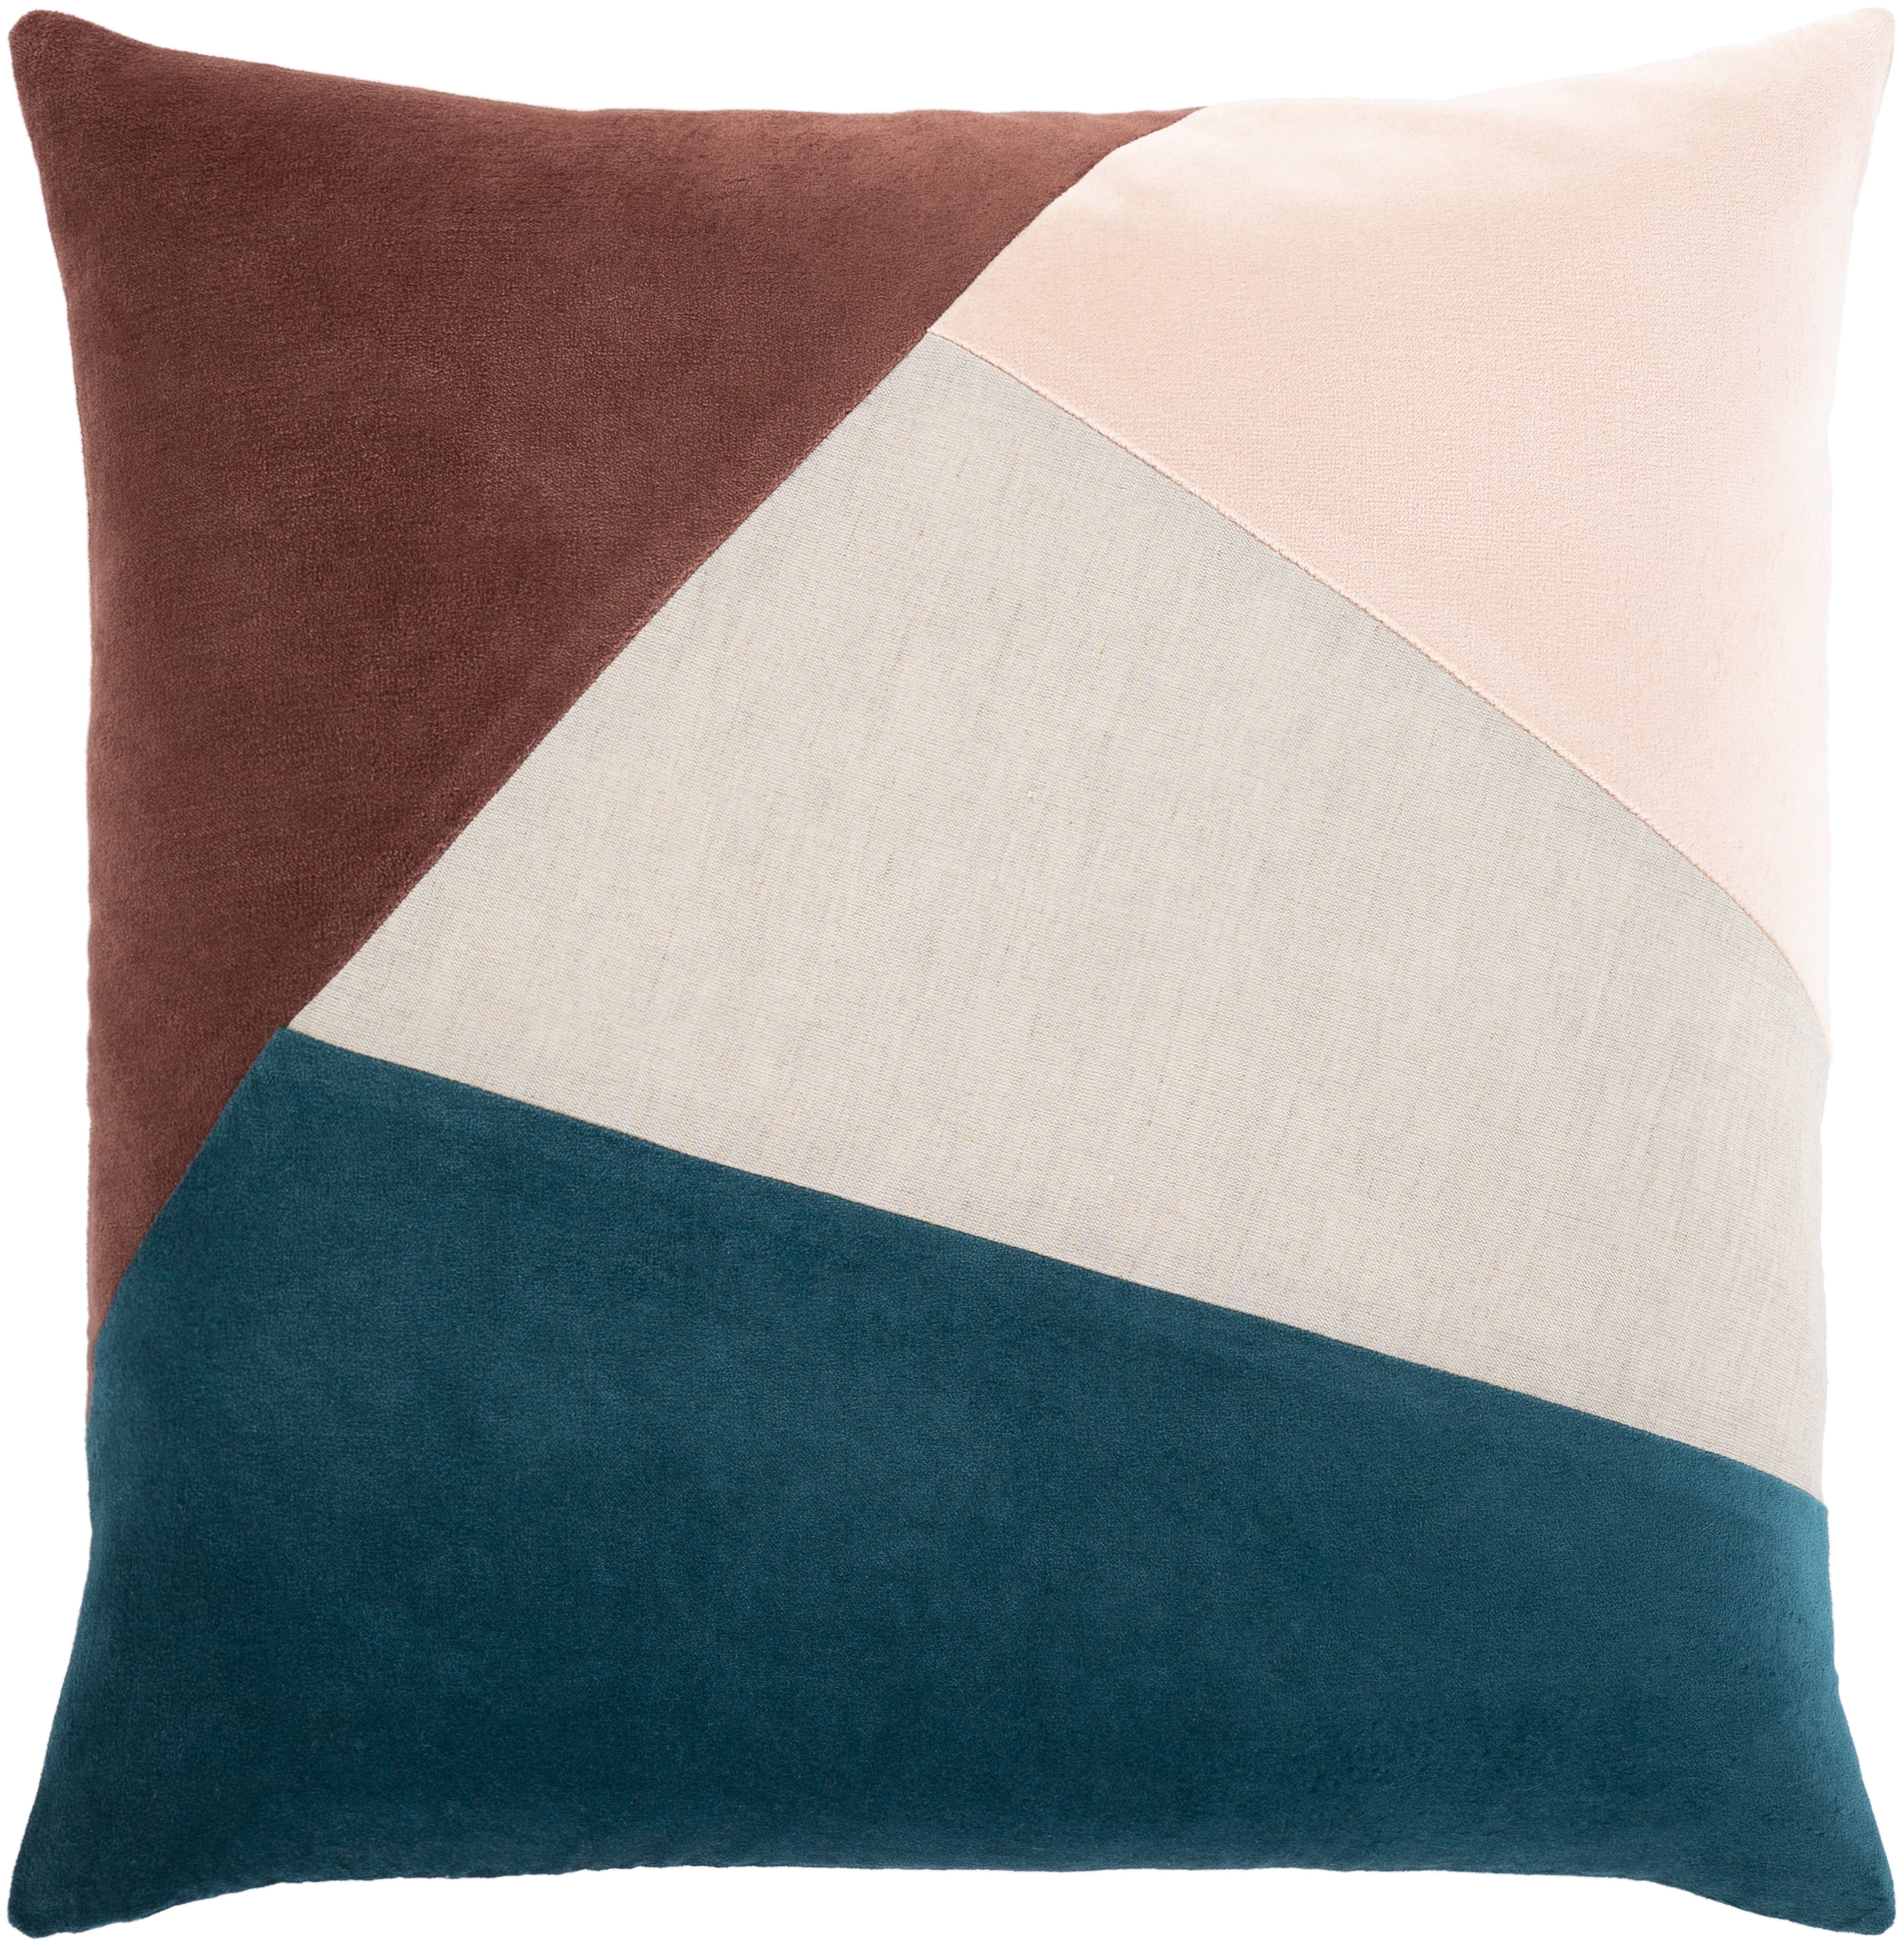 Moza Throw Pillow, 20" x 20", with down insert - Surya